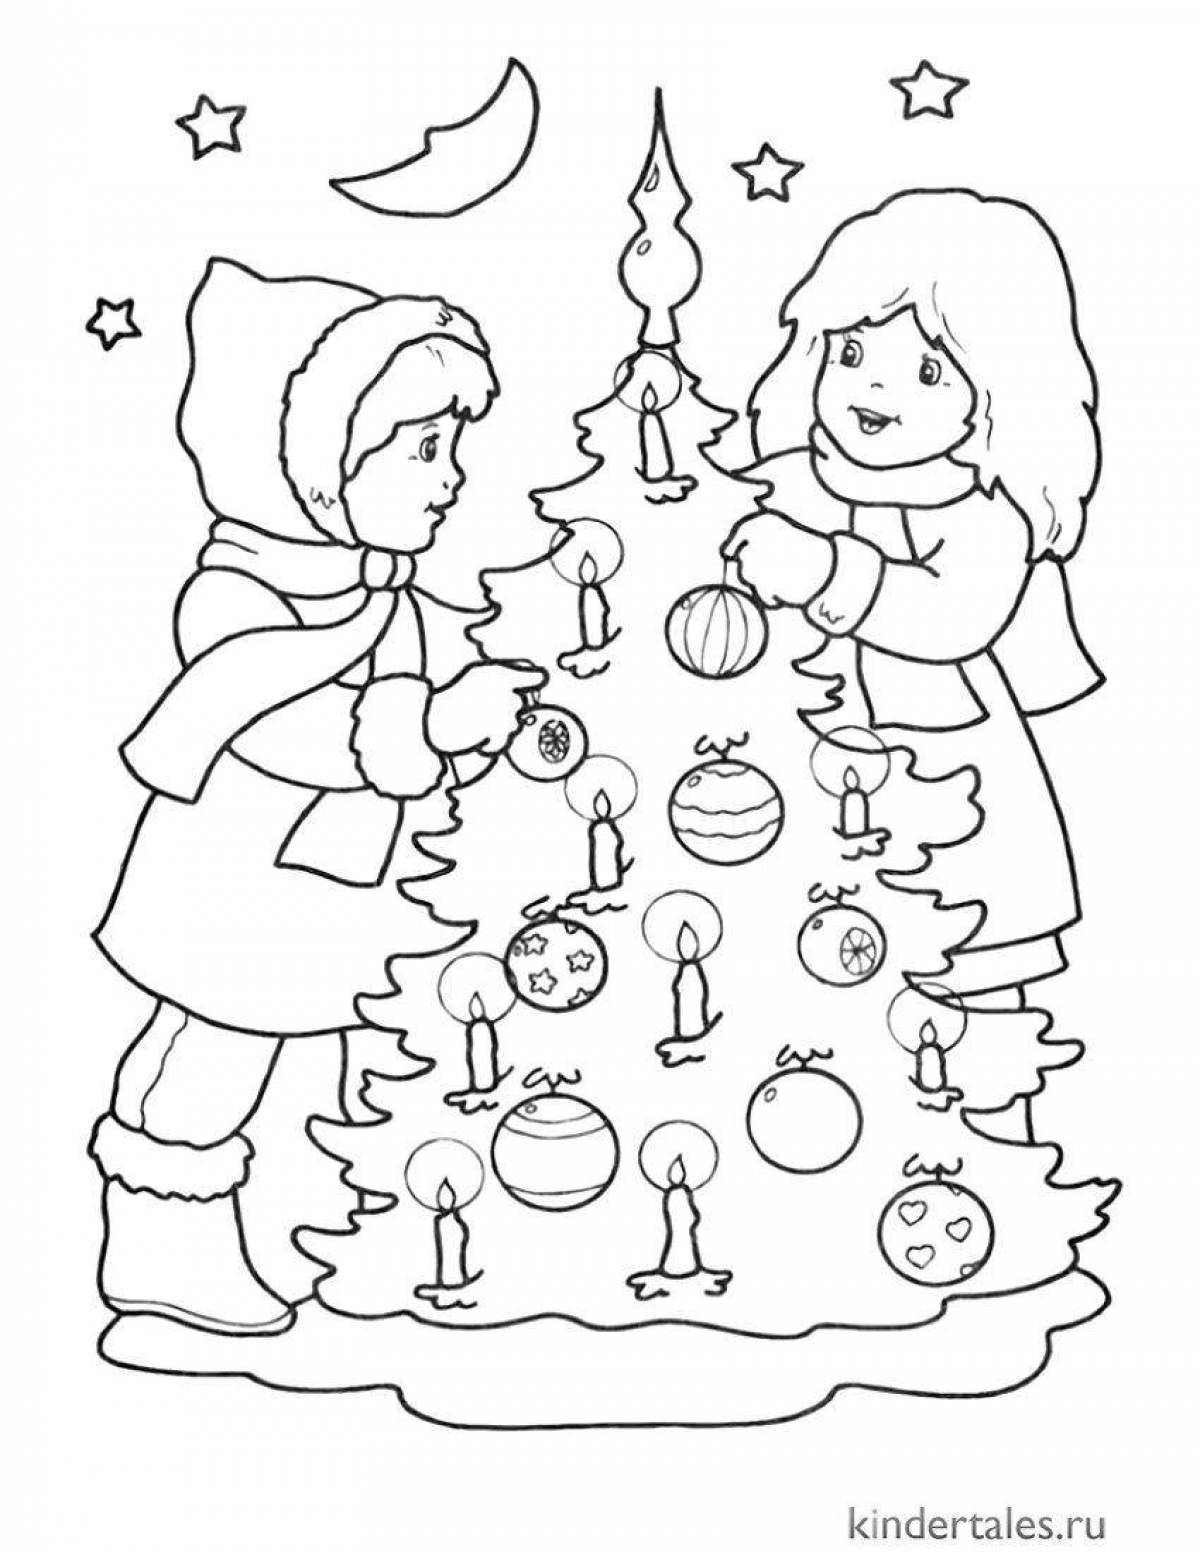 Nice Christmas coloring book for 4-5 year olds